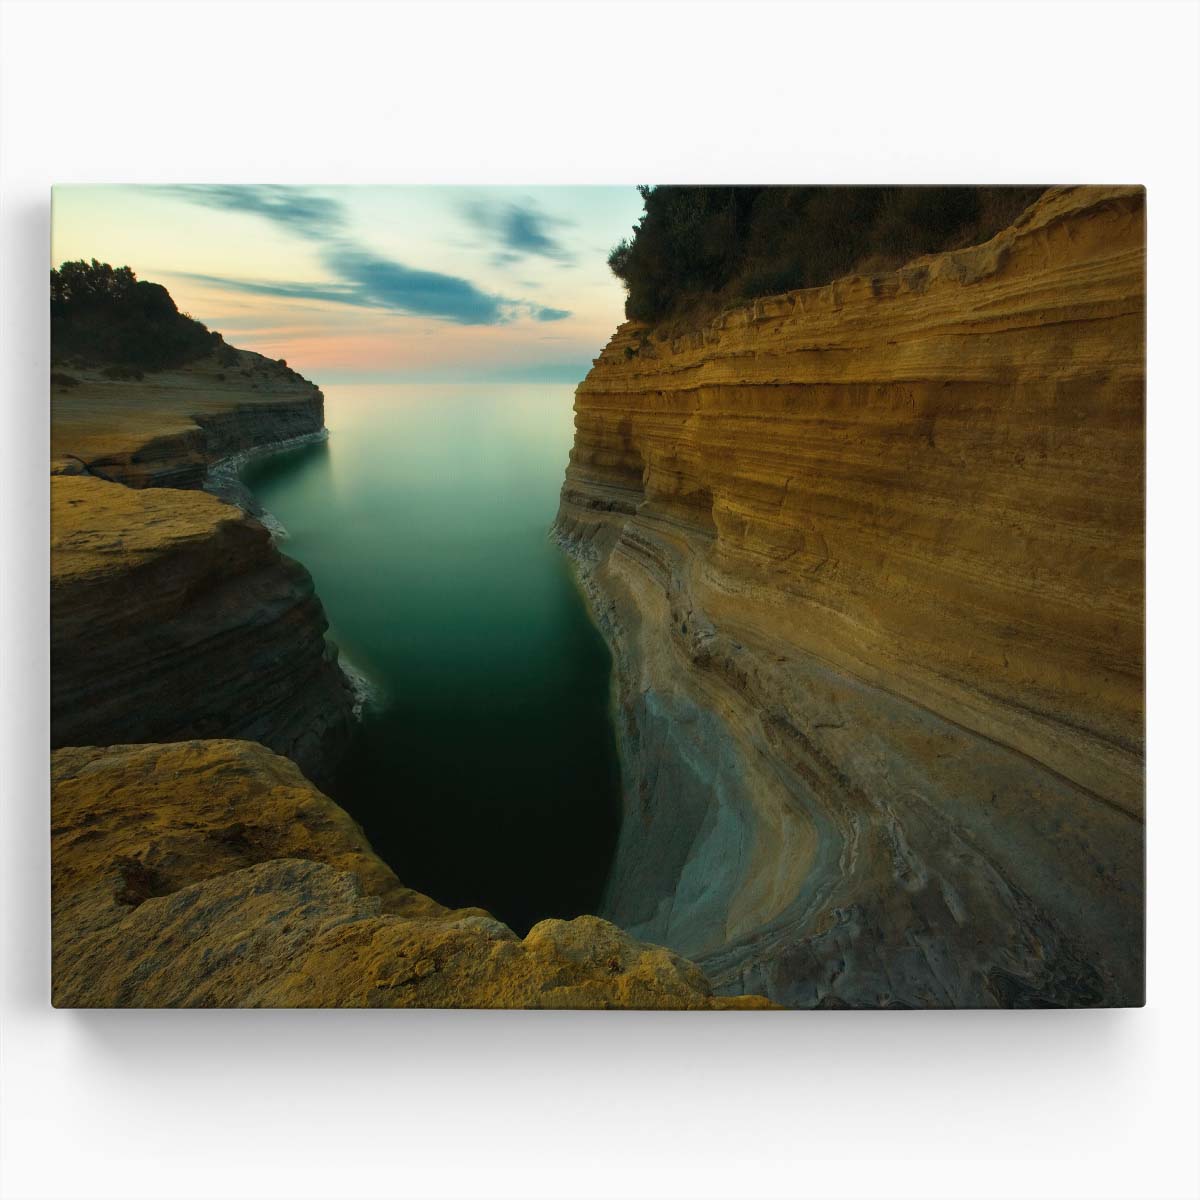 Corfu's Canal D'Amour Coastal Seascape Wall Art by Luxuriance Designs. Made in USA.